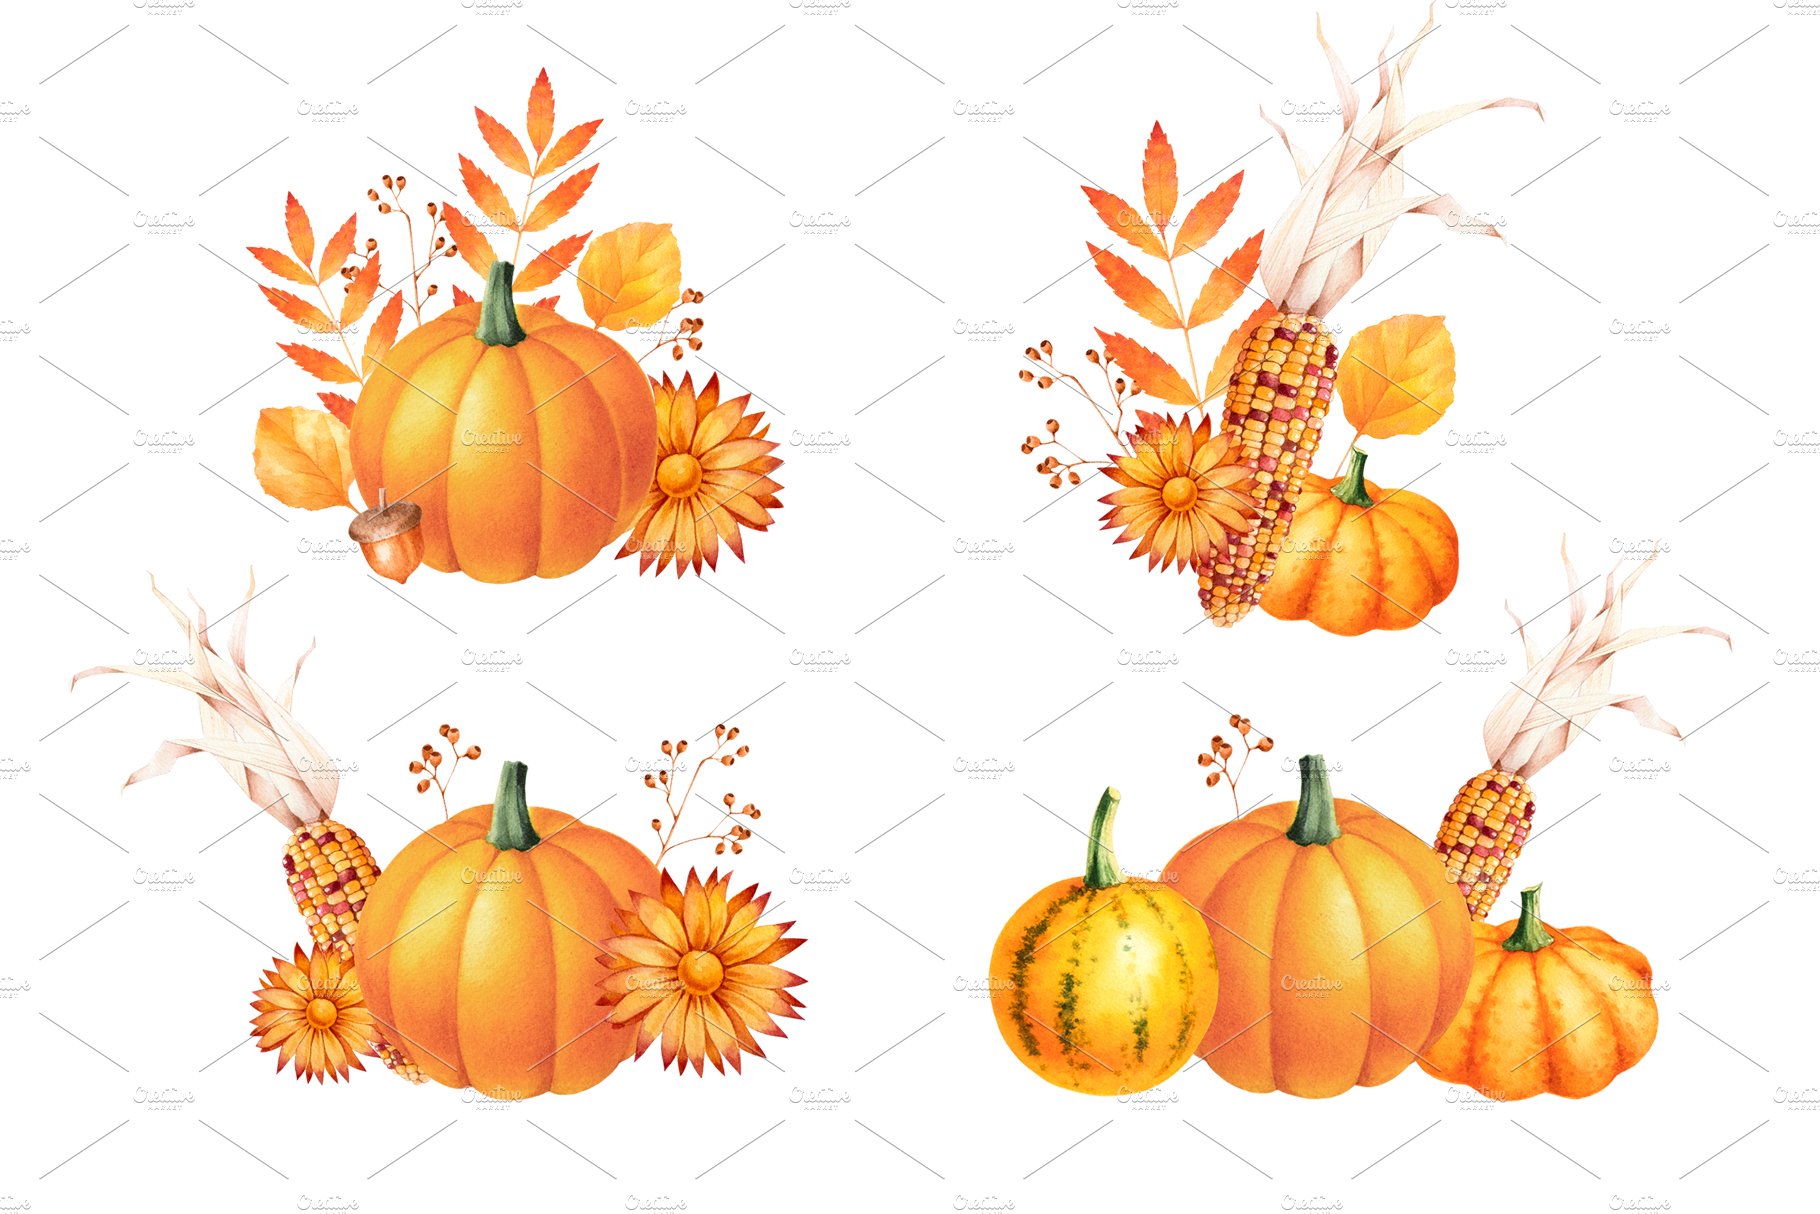 Some pumpkins illustrations in a classic color.